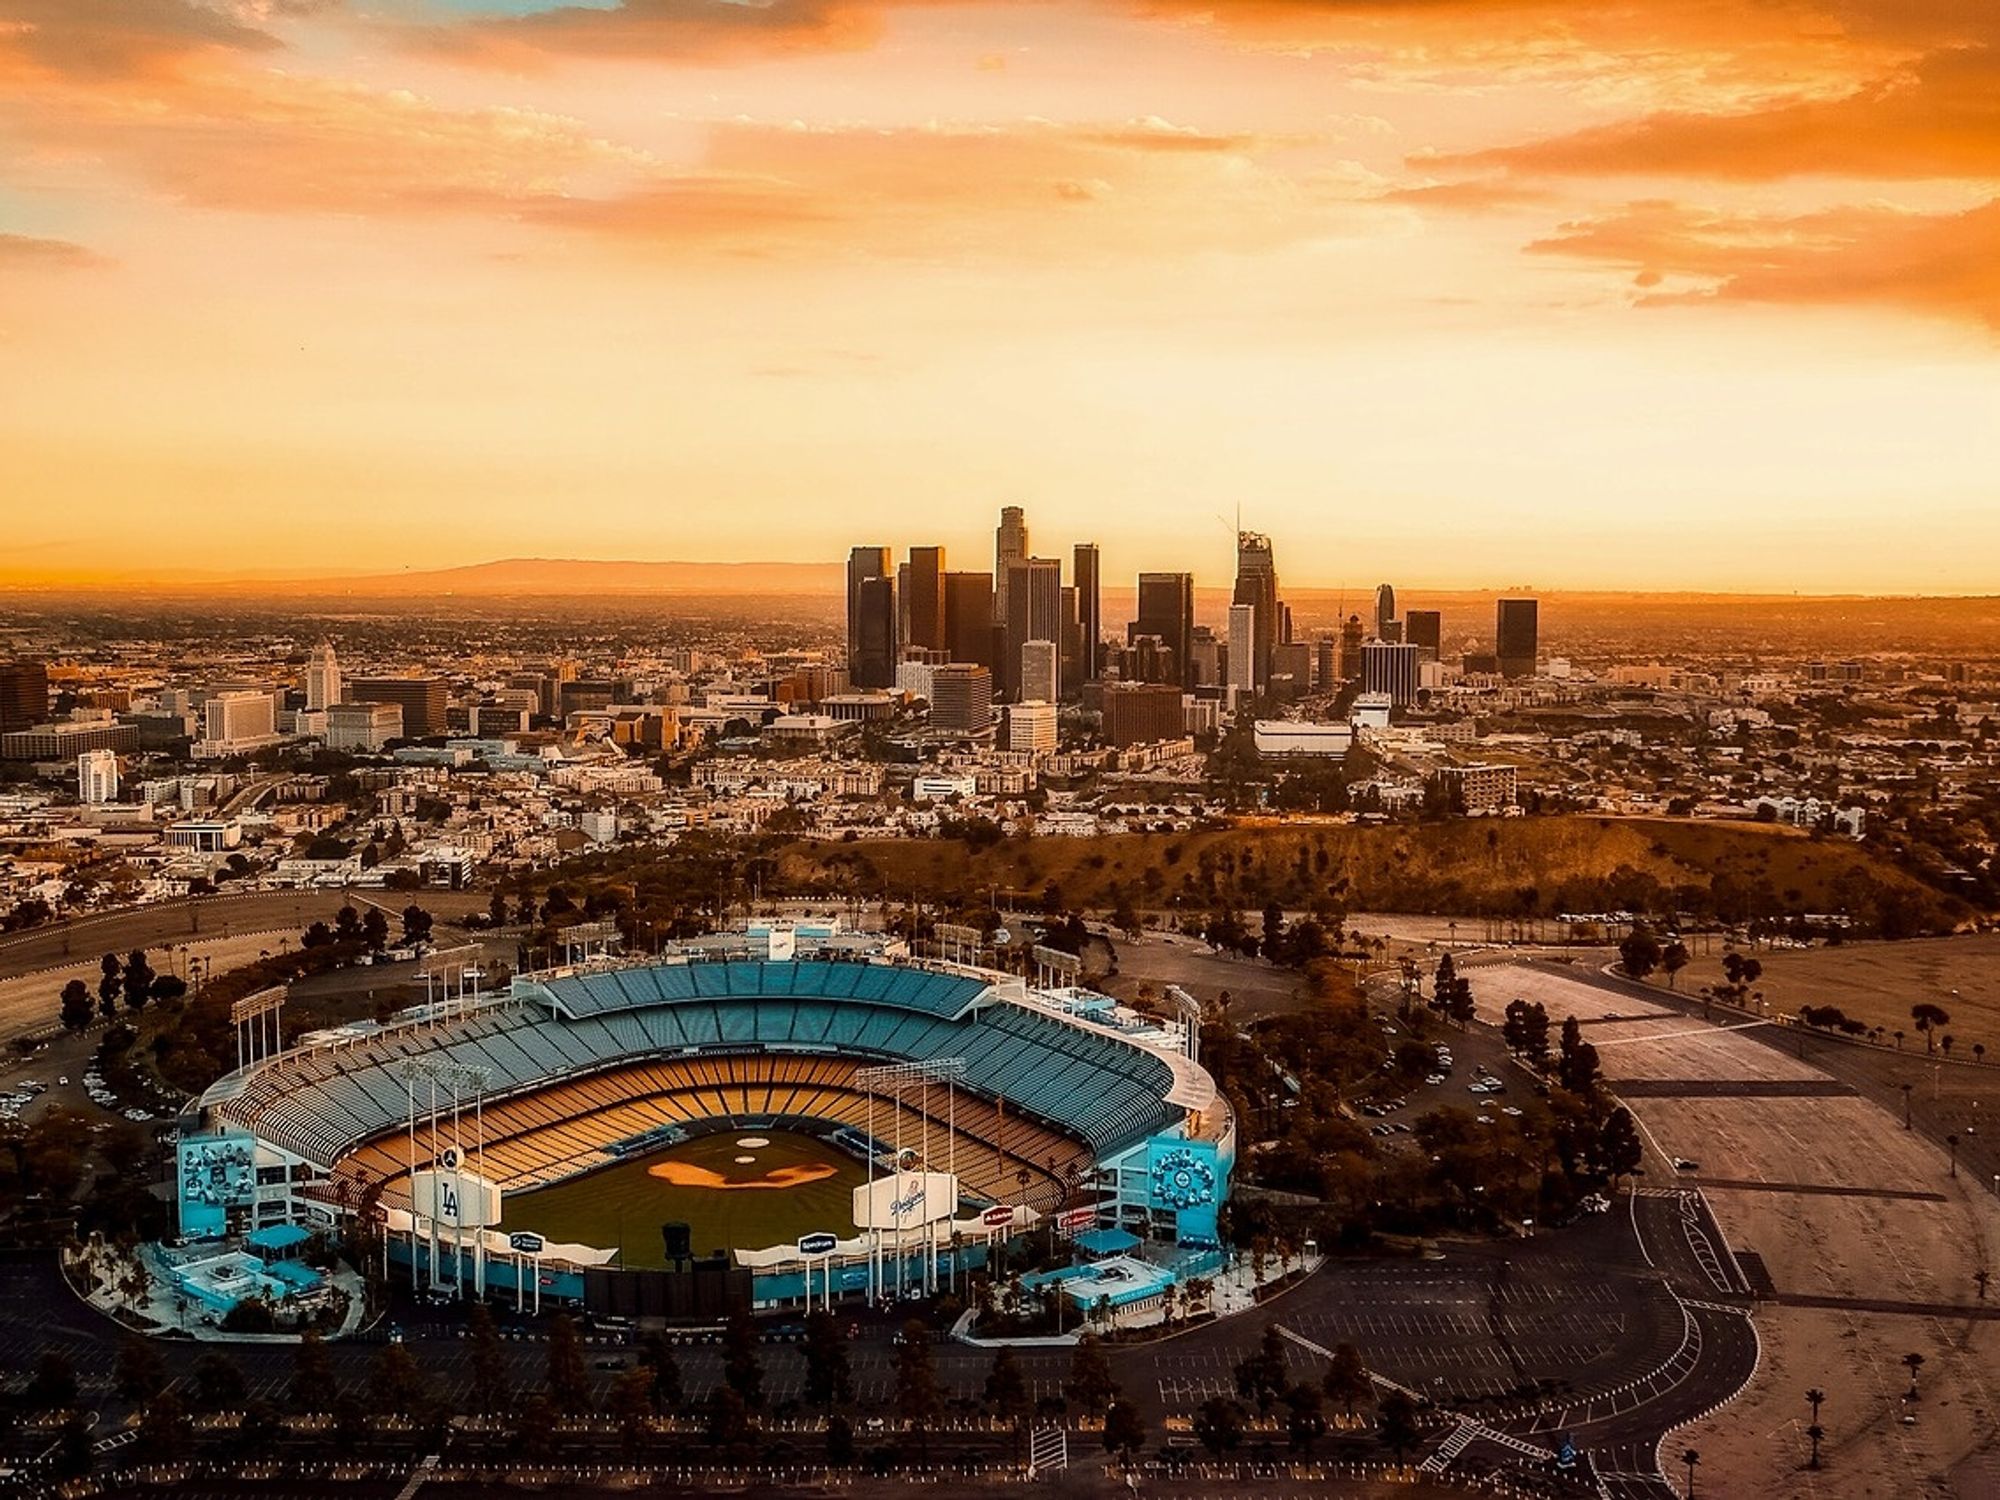 Dodger Stadium Gets a Tech Upgrade for Opening Day. Now it Just Needs Fans.